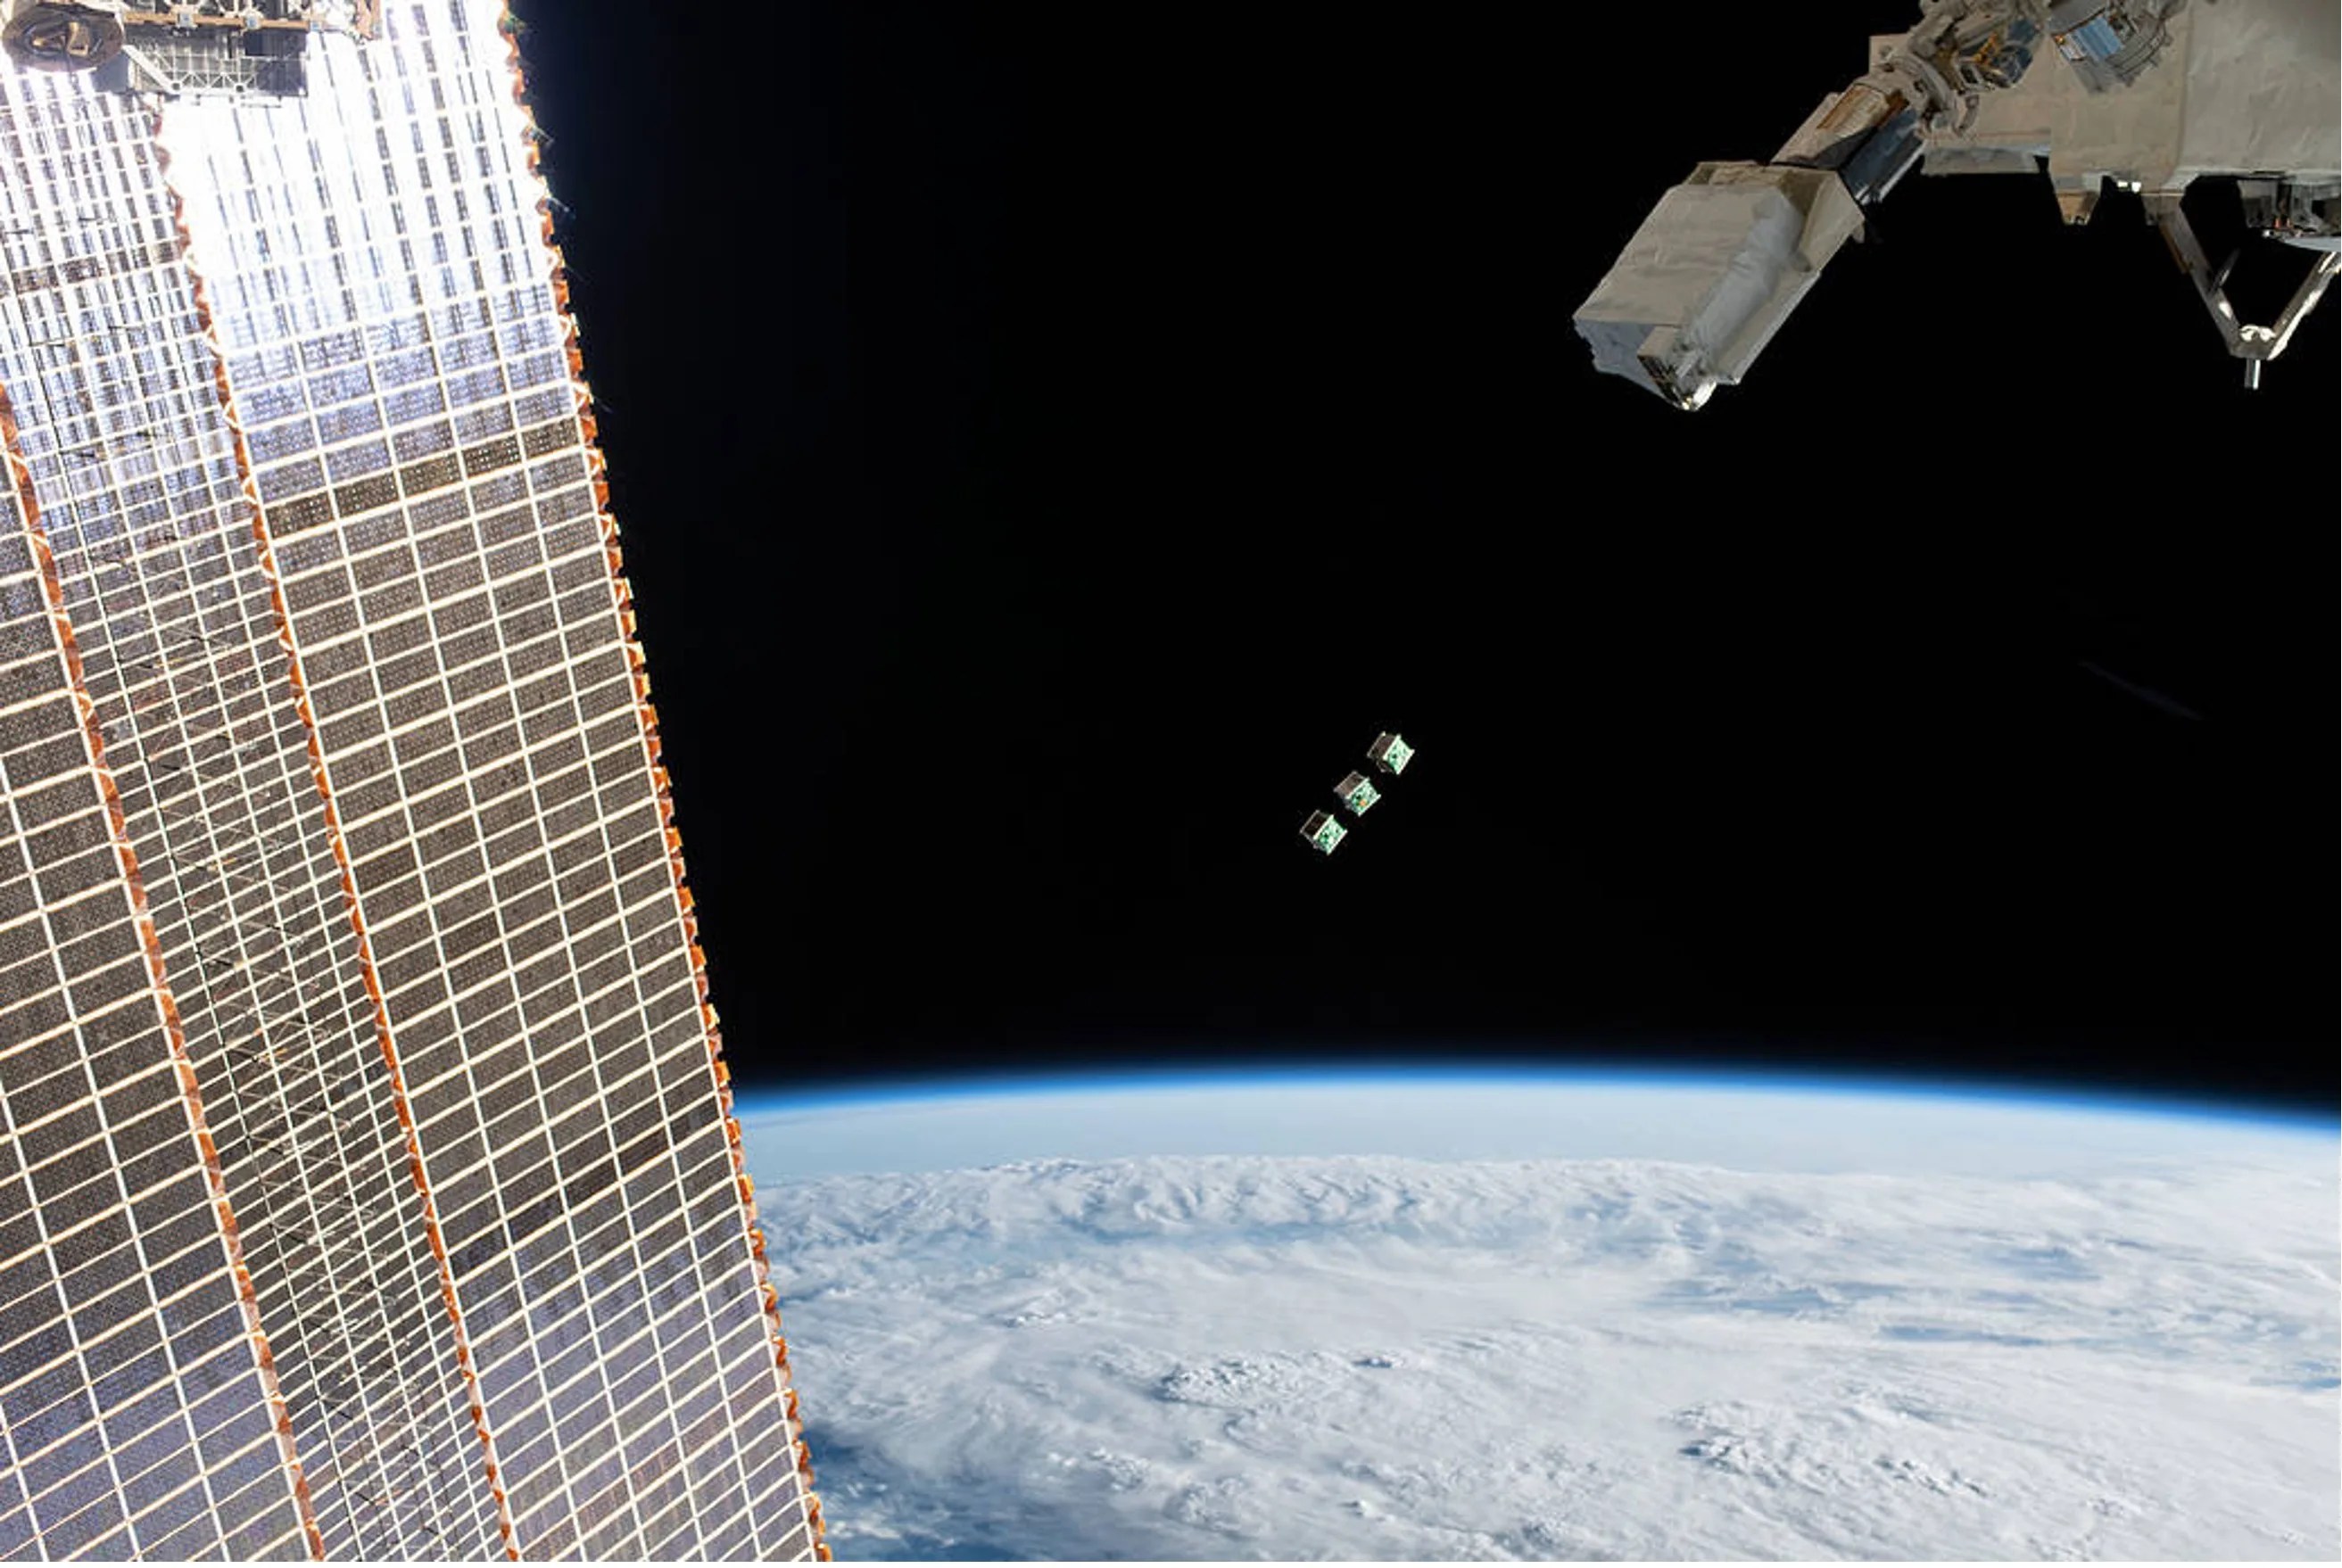 Photo of 3 cubesats in orbit above the earth taken from the ISS.